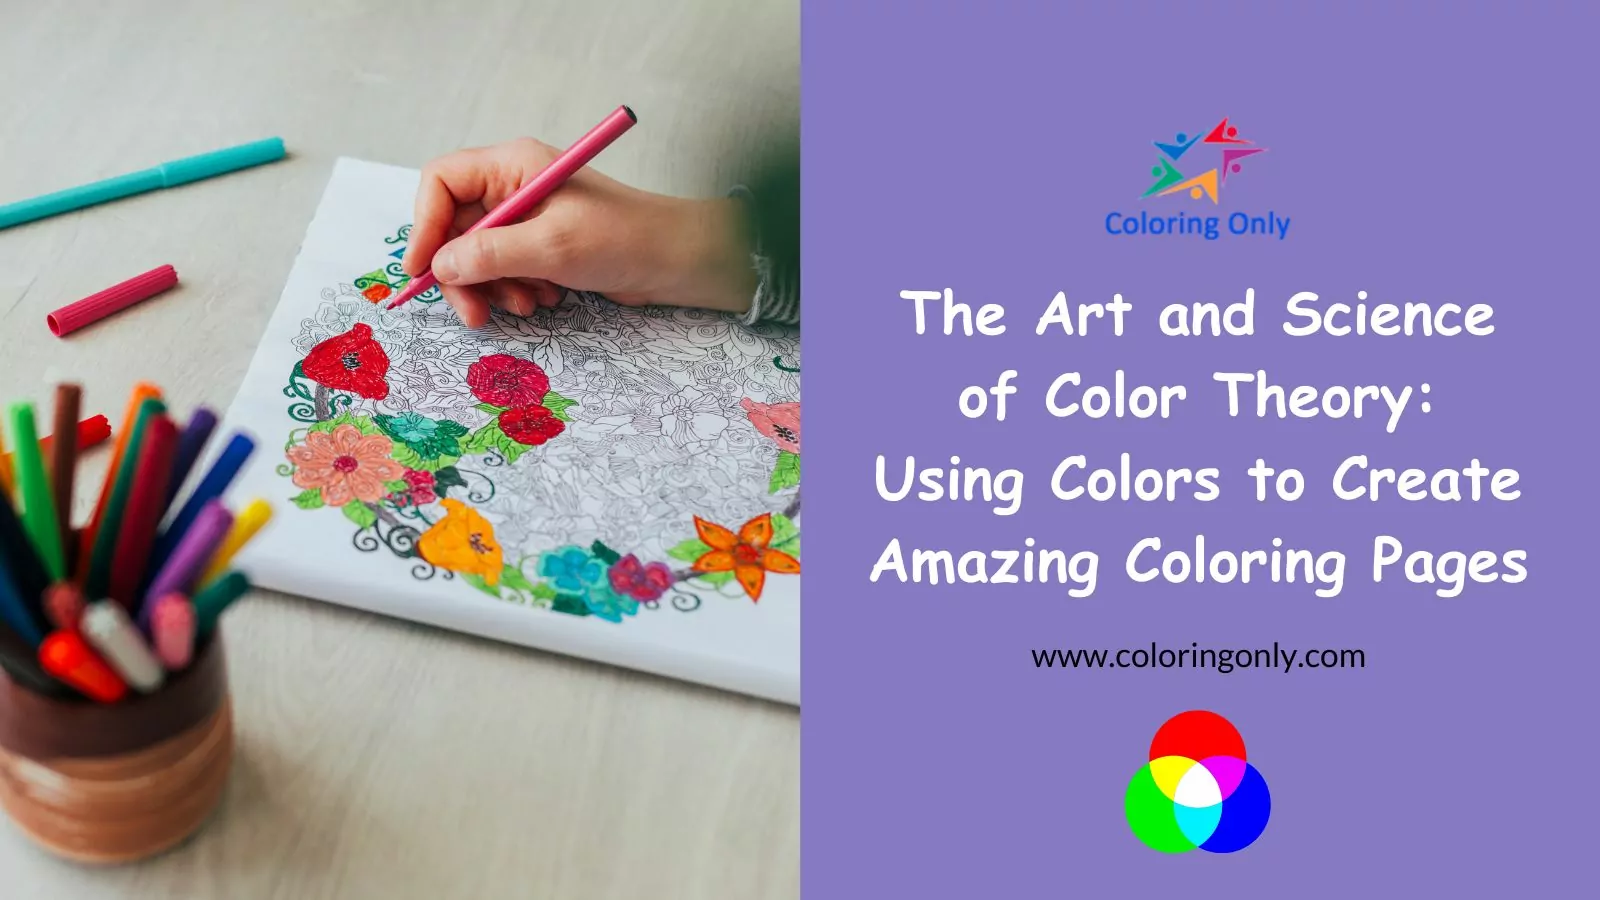 The Art and Science of Color Theory: Using Colors to Create Amazing Coloring Pages